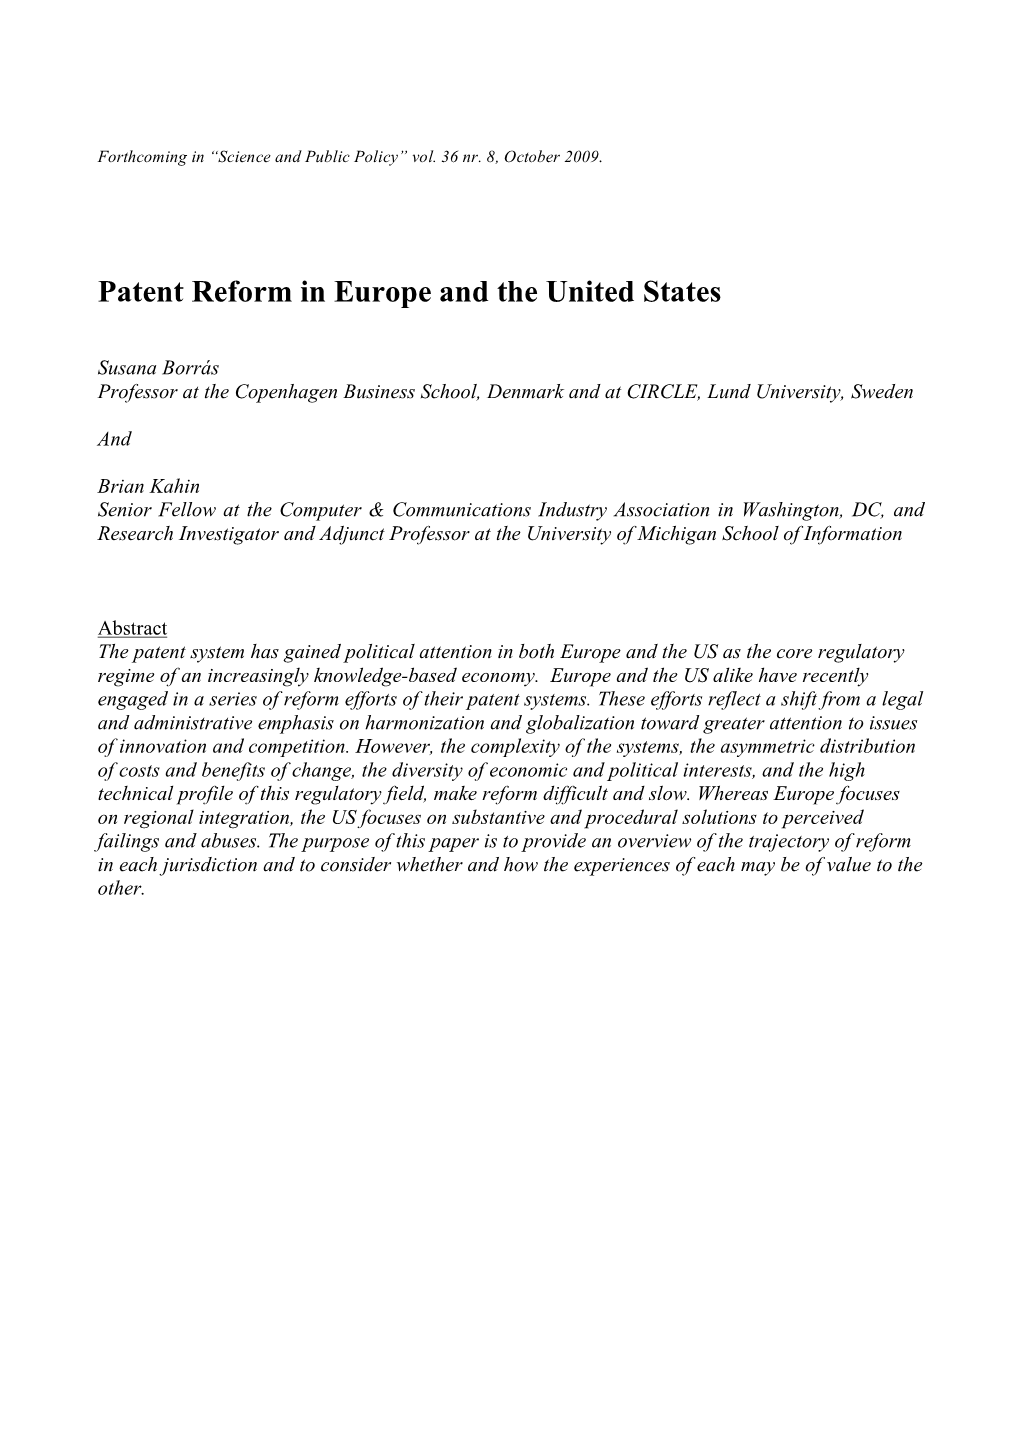 Patent Reform in Europe and the United States